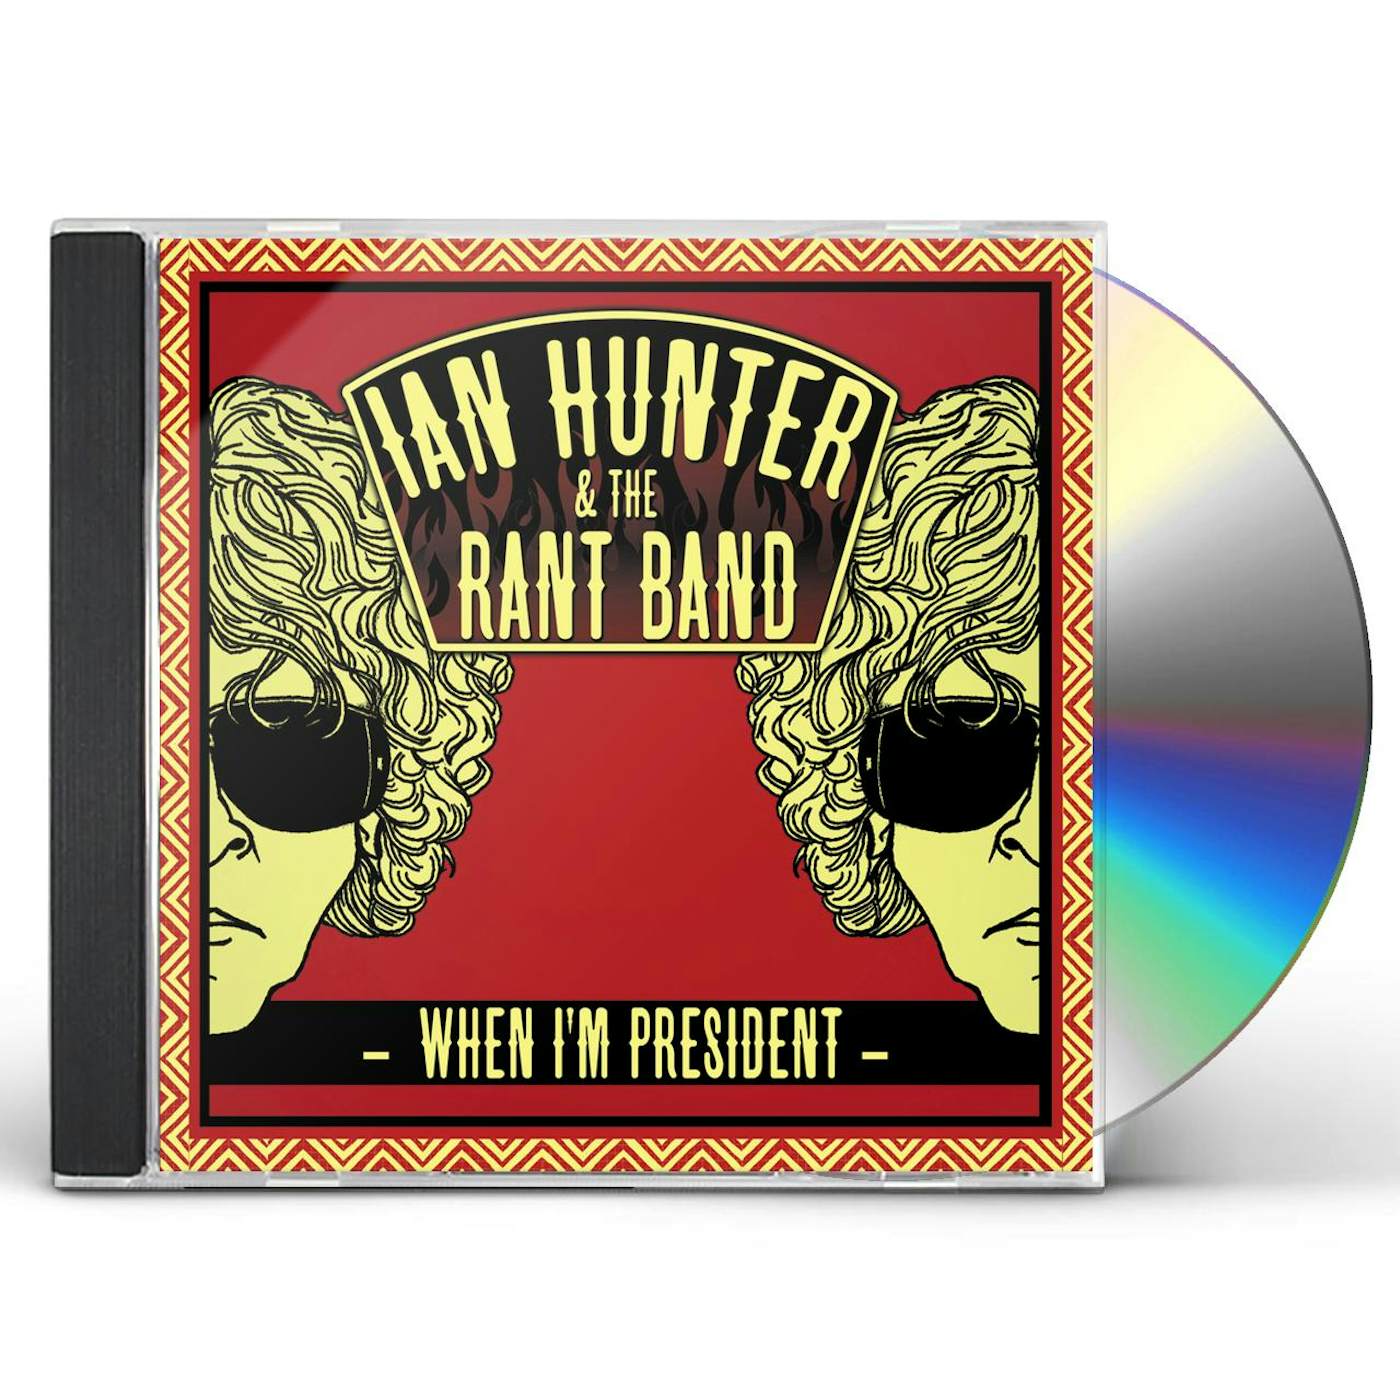 Ian Hunter And The Rant Band WHEN I'M PRESIDENT CD